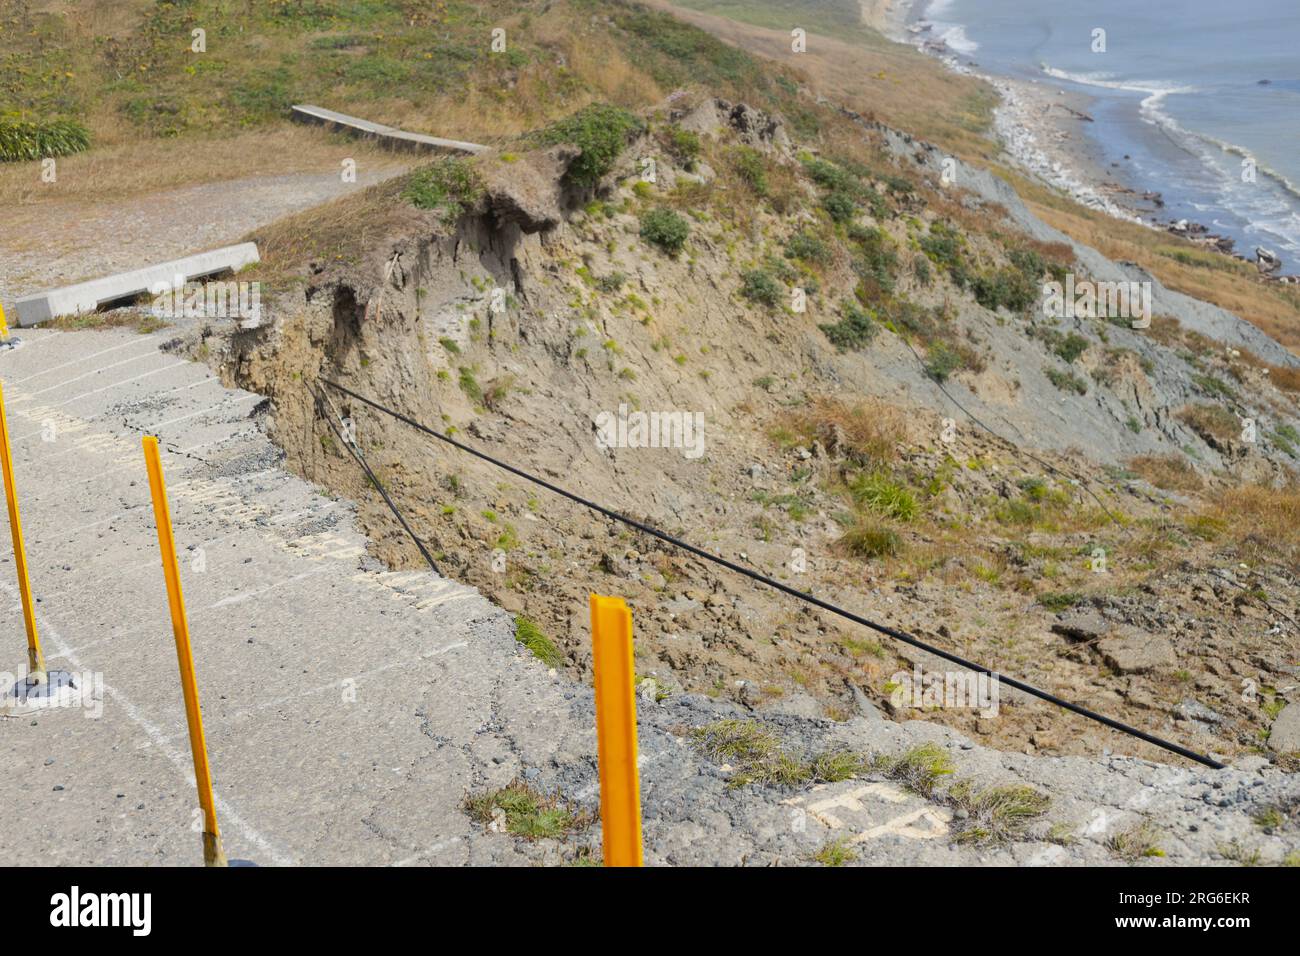 Part of a paved trail eroded away, on the coast of Oregon near Port Orford. Stock Photo